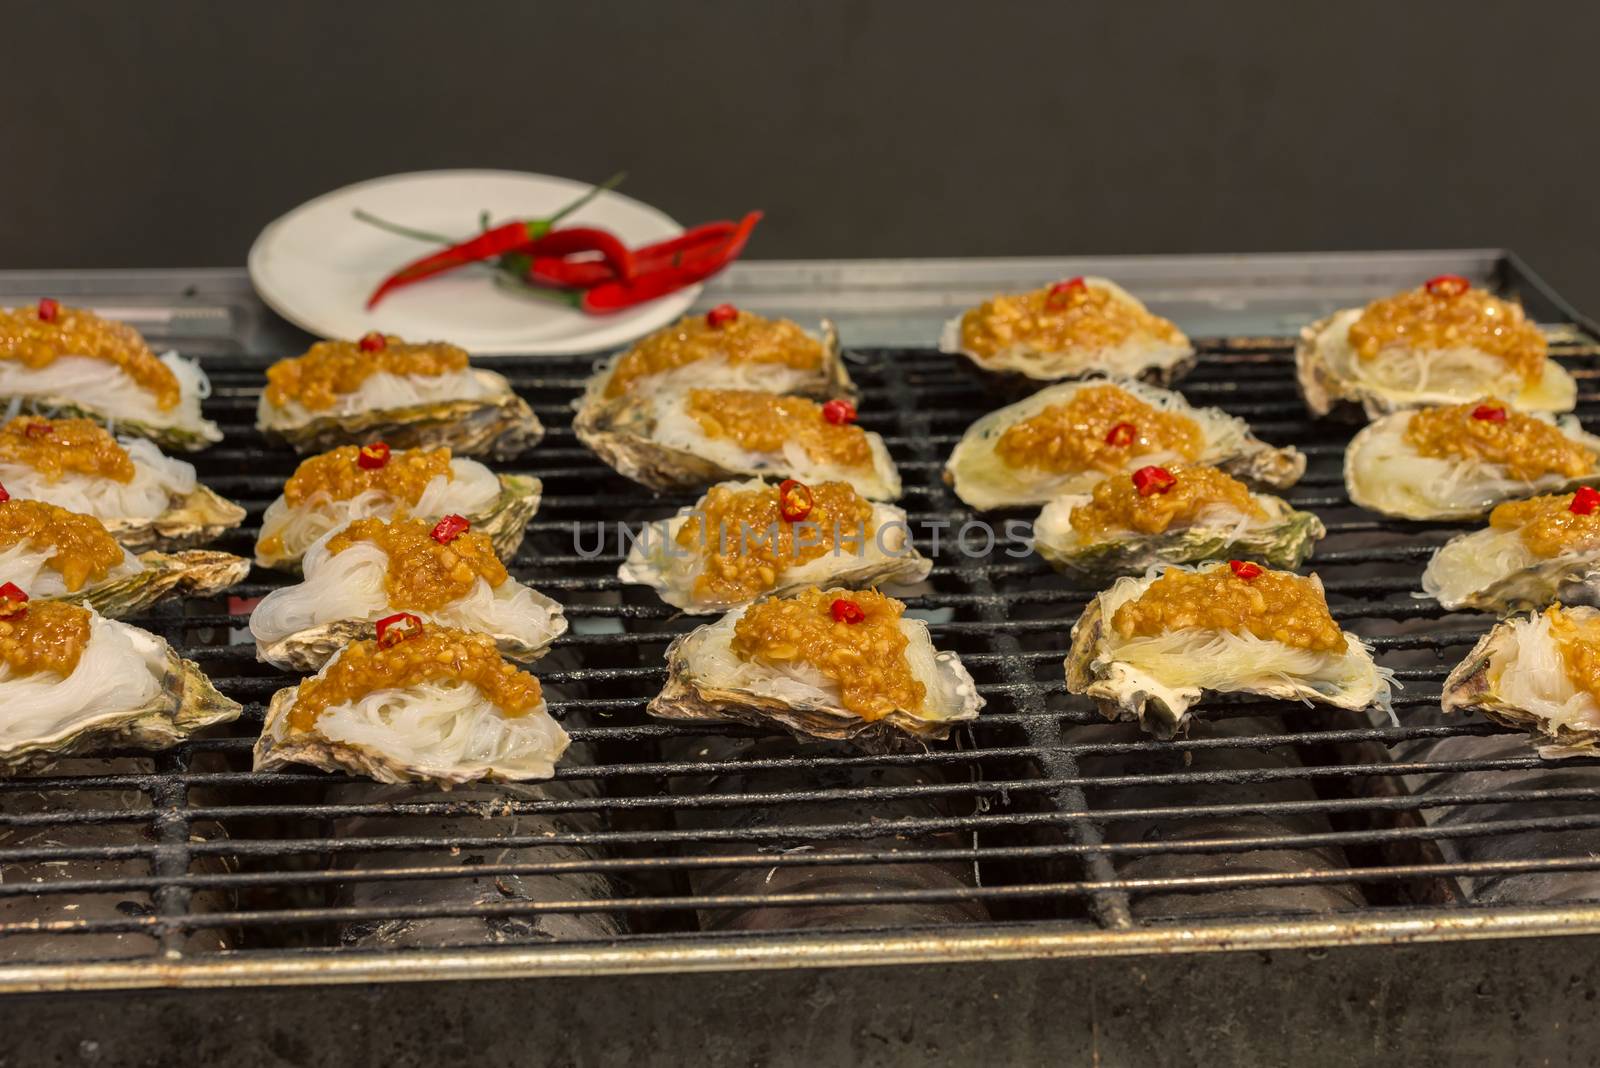 Street food asia. Grilled seafood. Oysters on the grill